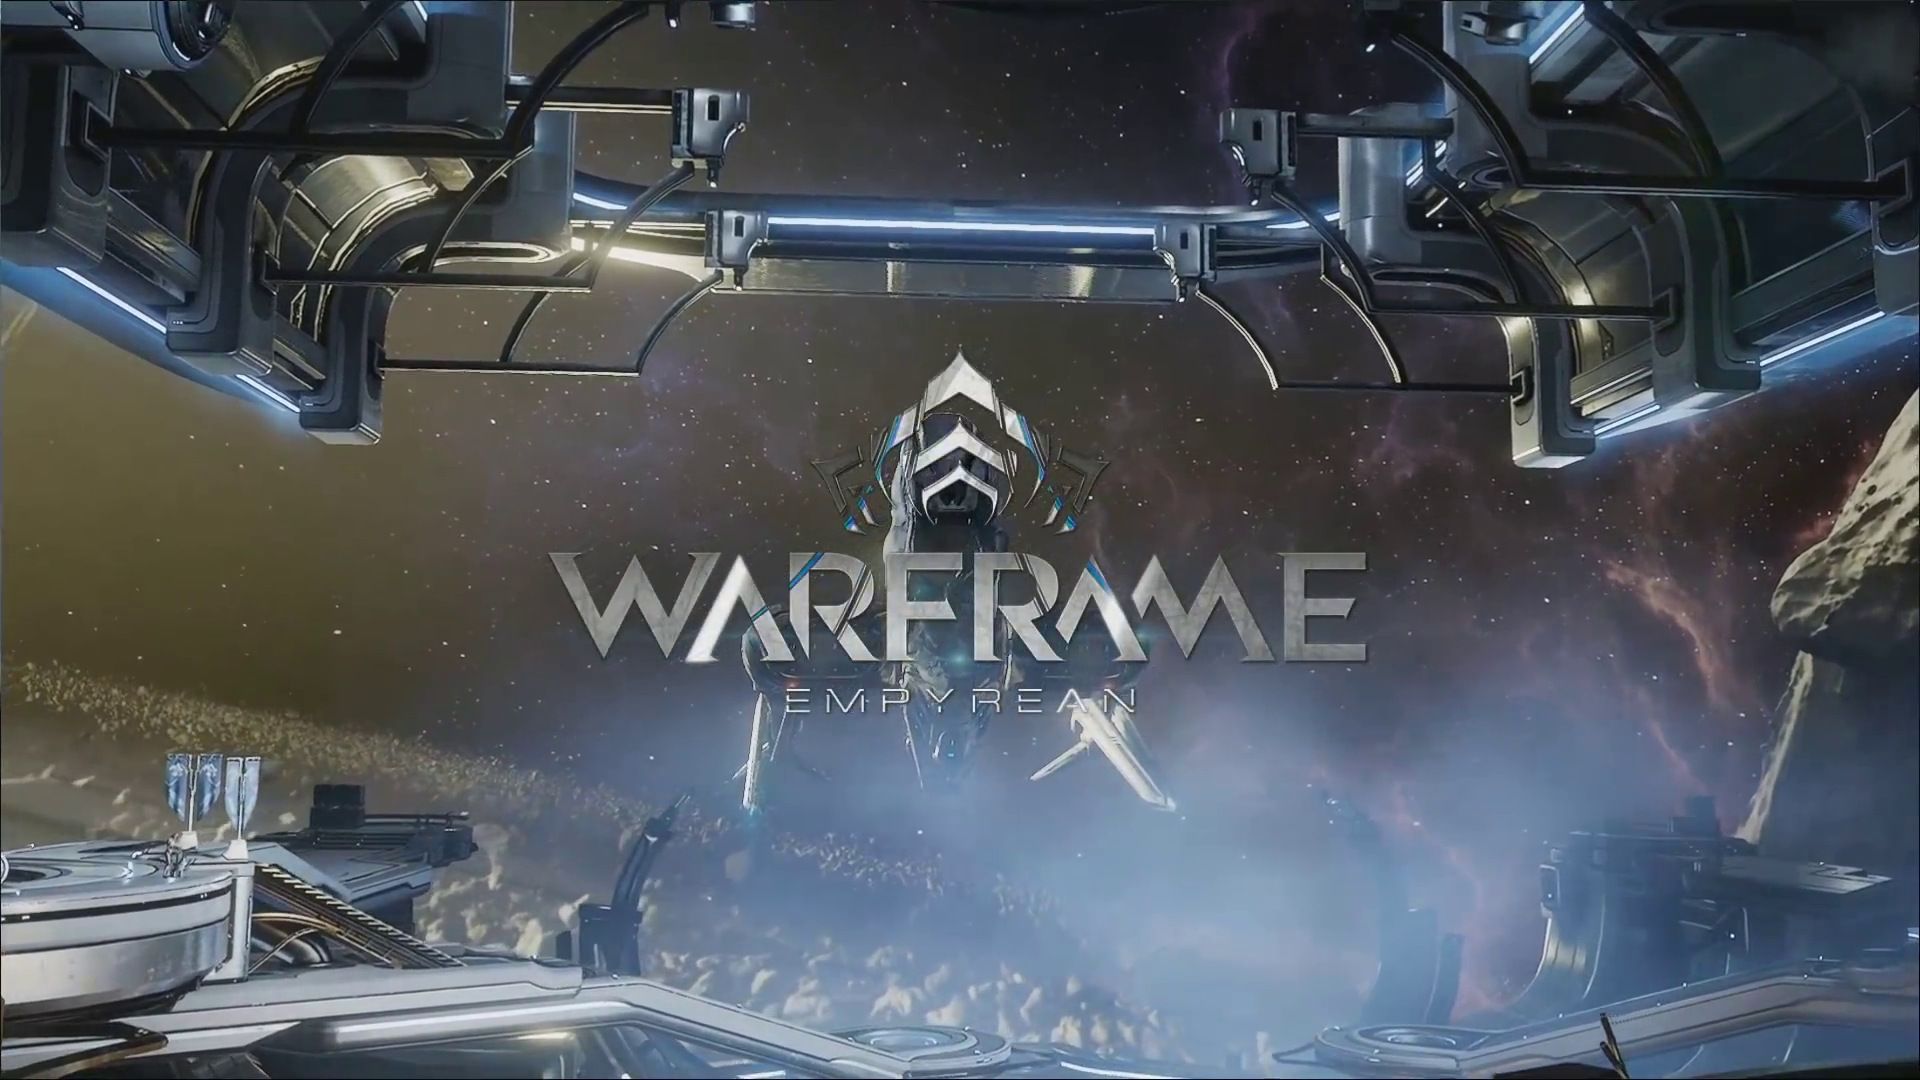 Warframe's brand new engine and ambitious Empyrean project — 40 minutes of live gameplay